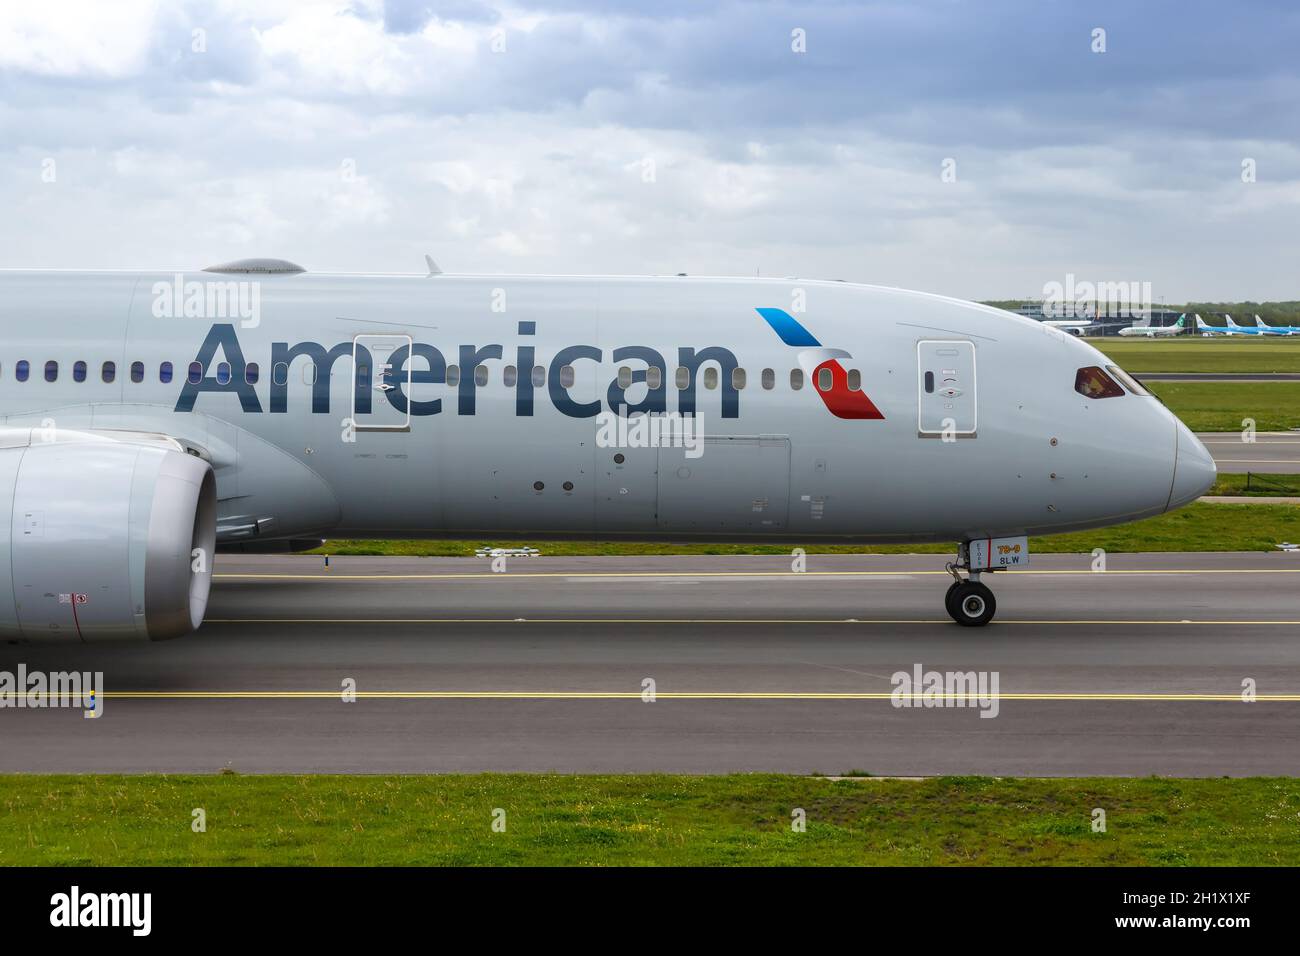 Amsterdam, Netherlands - May 21, 2021: American Airlines Boeing 787-9 Dreamliner airplane at Amsterdam Schiphol airport (AMS) in the Netherlands. Stock Photo